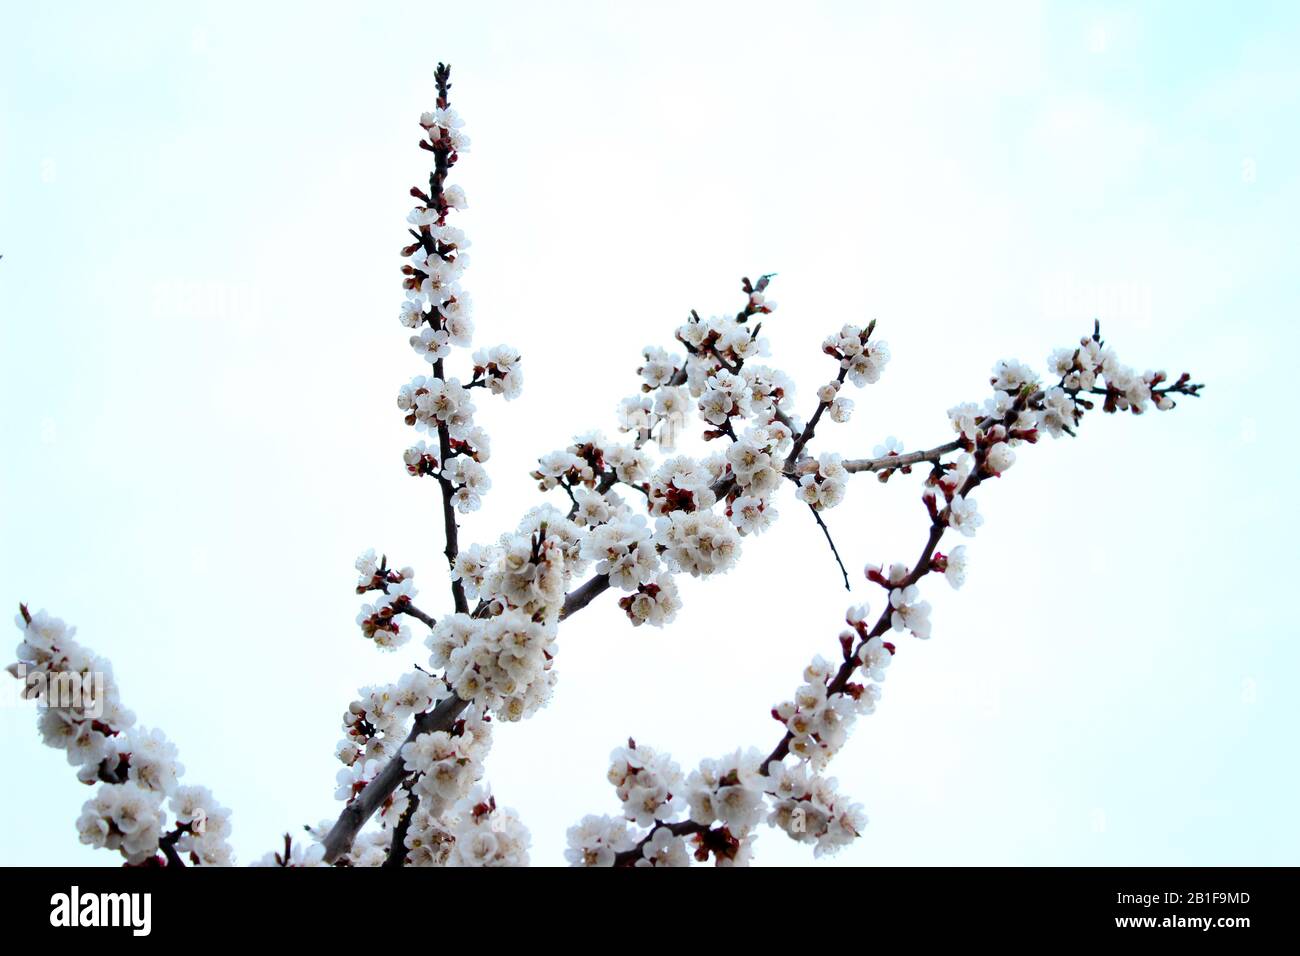 Close up cherry blossom on  white background - Stock image. Blooming Japanese sakura buds and flowers on light sky with copy space. Stock Photo